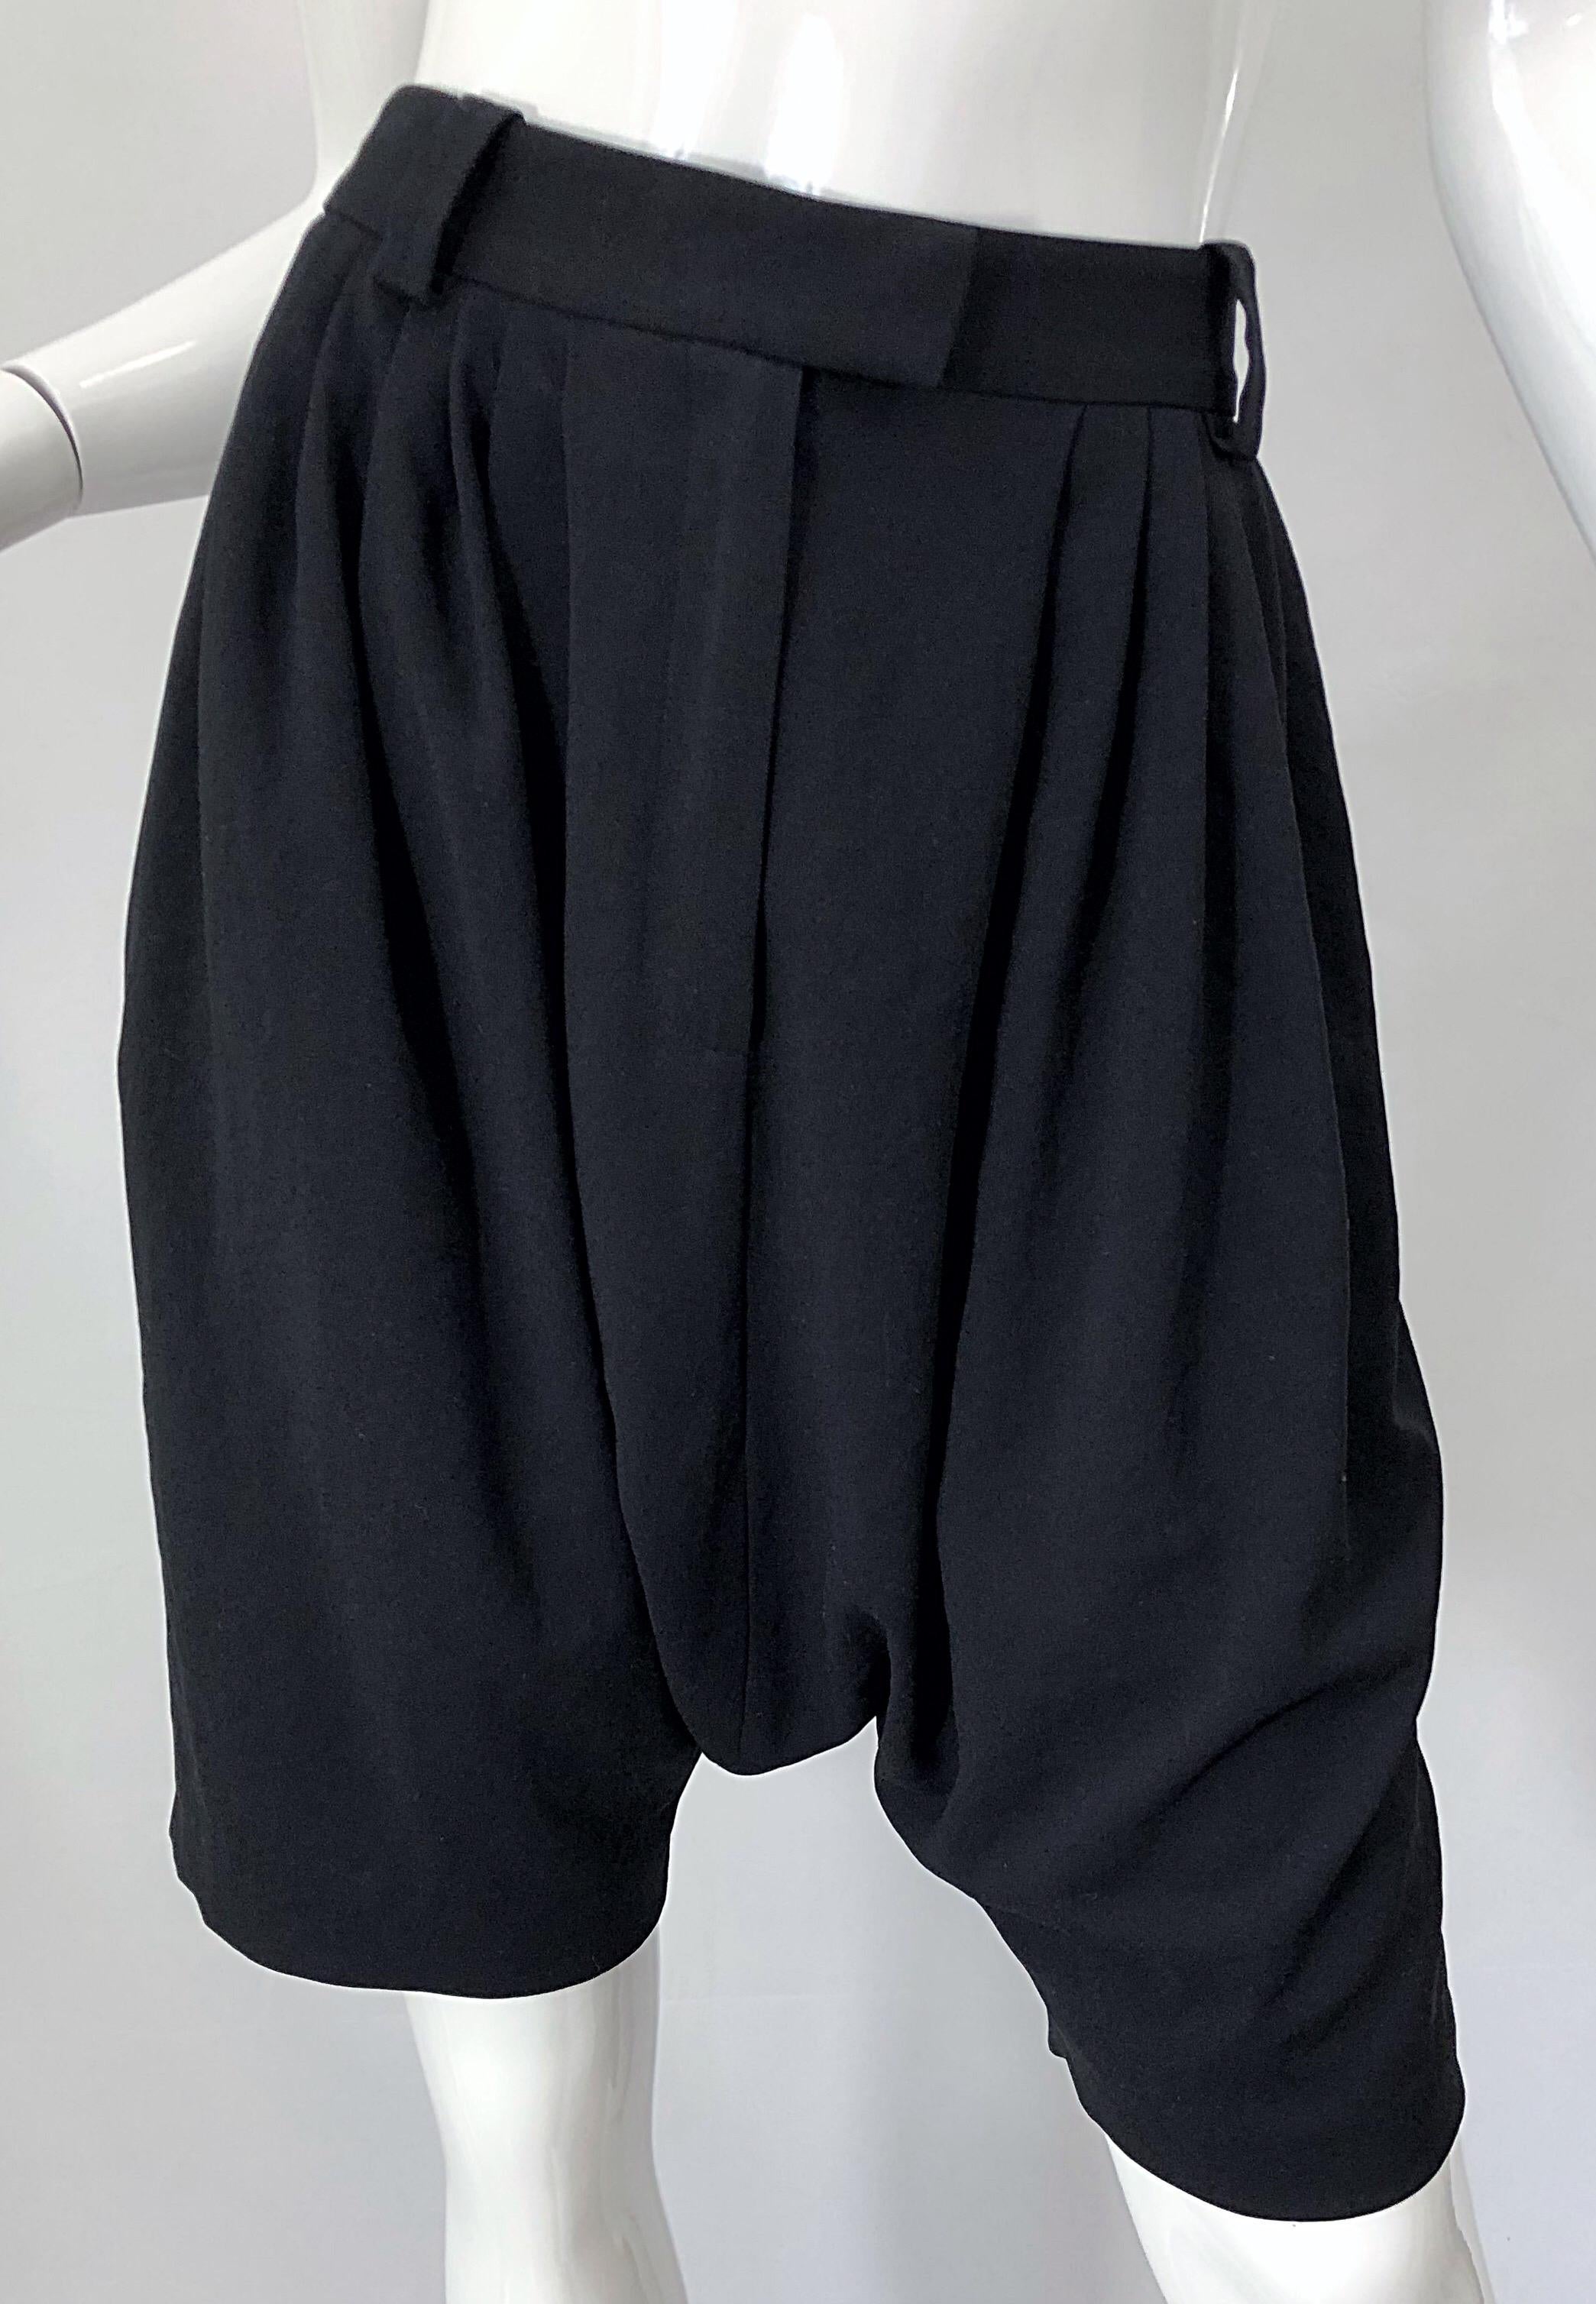 NWT Givenchy by Clare Waight Keller Size 40 / 8 Black Drop Crotch / Waist Shorts For Sale 5